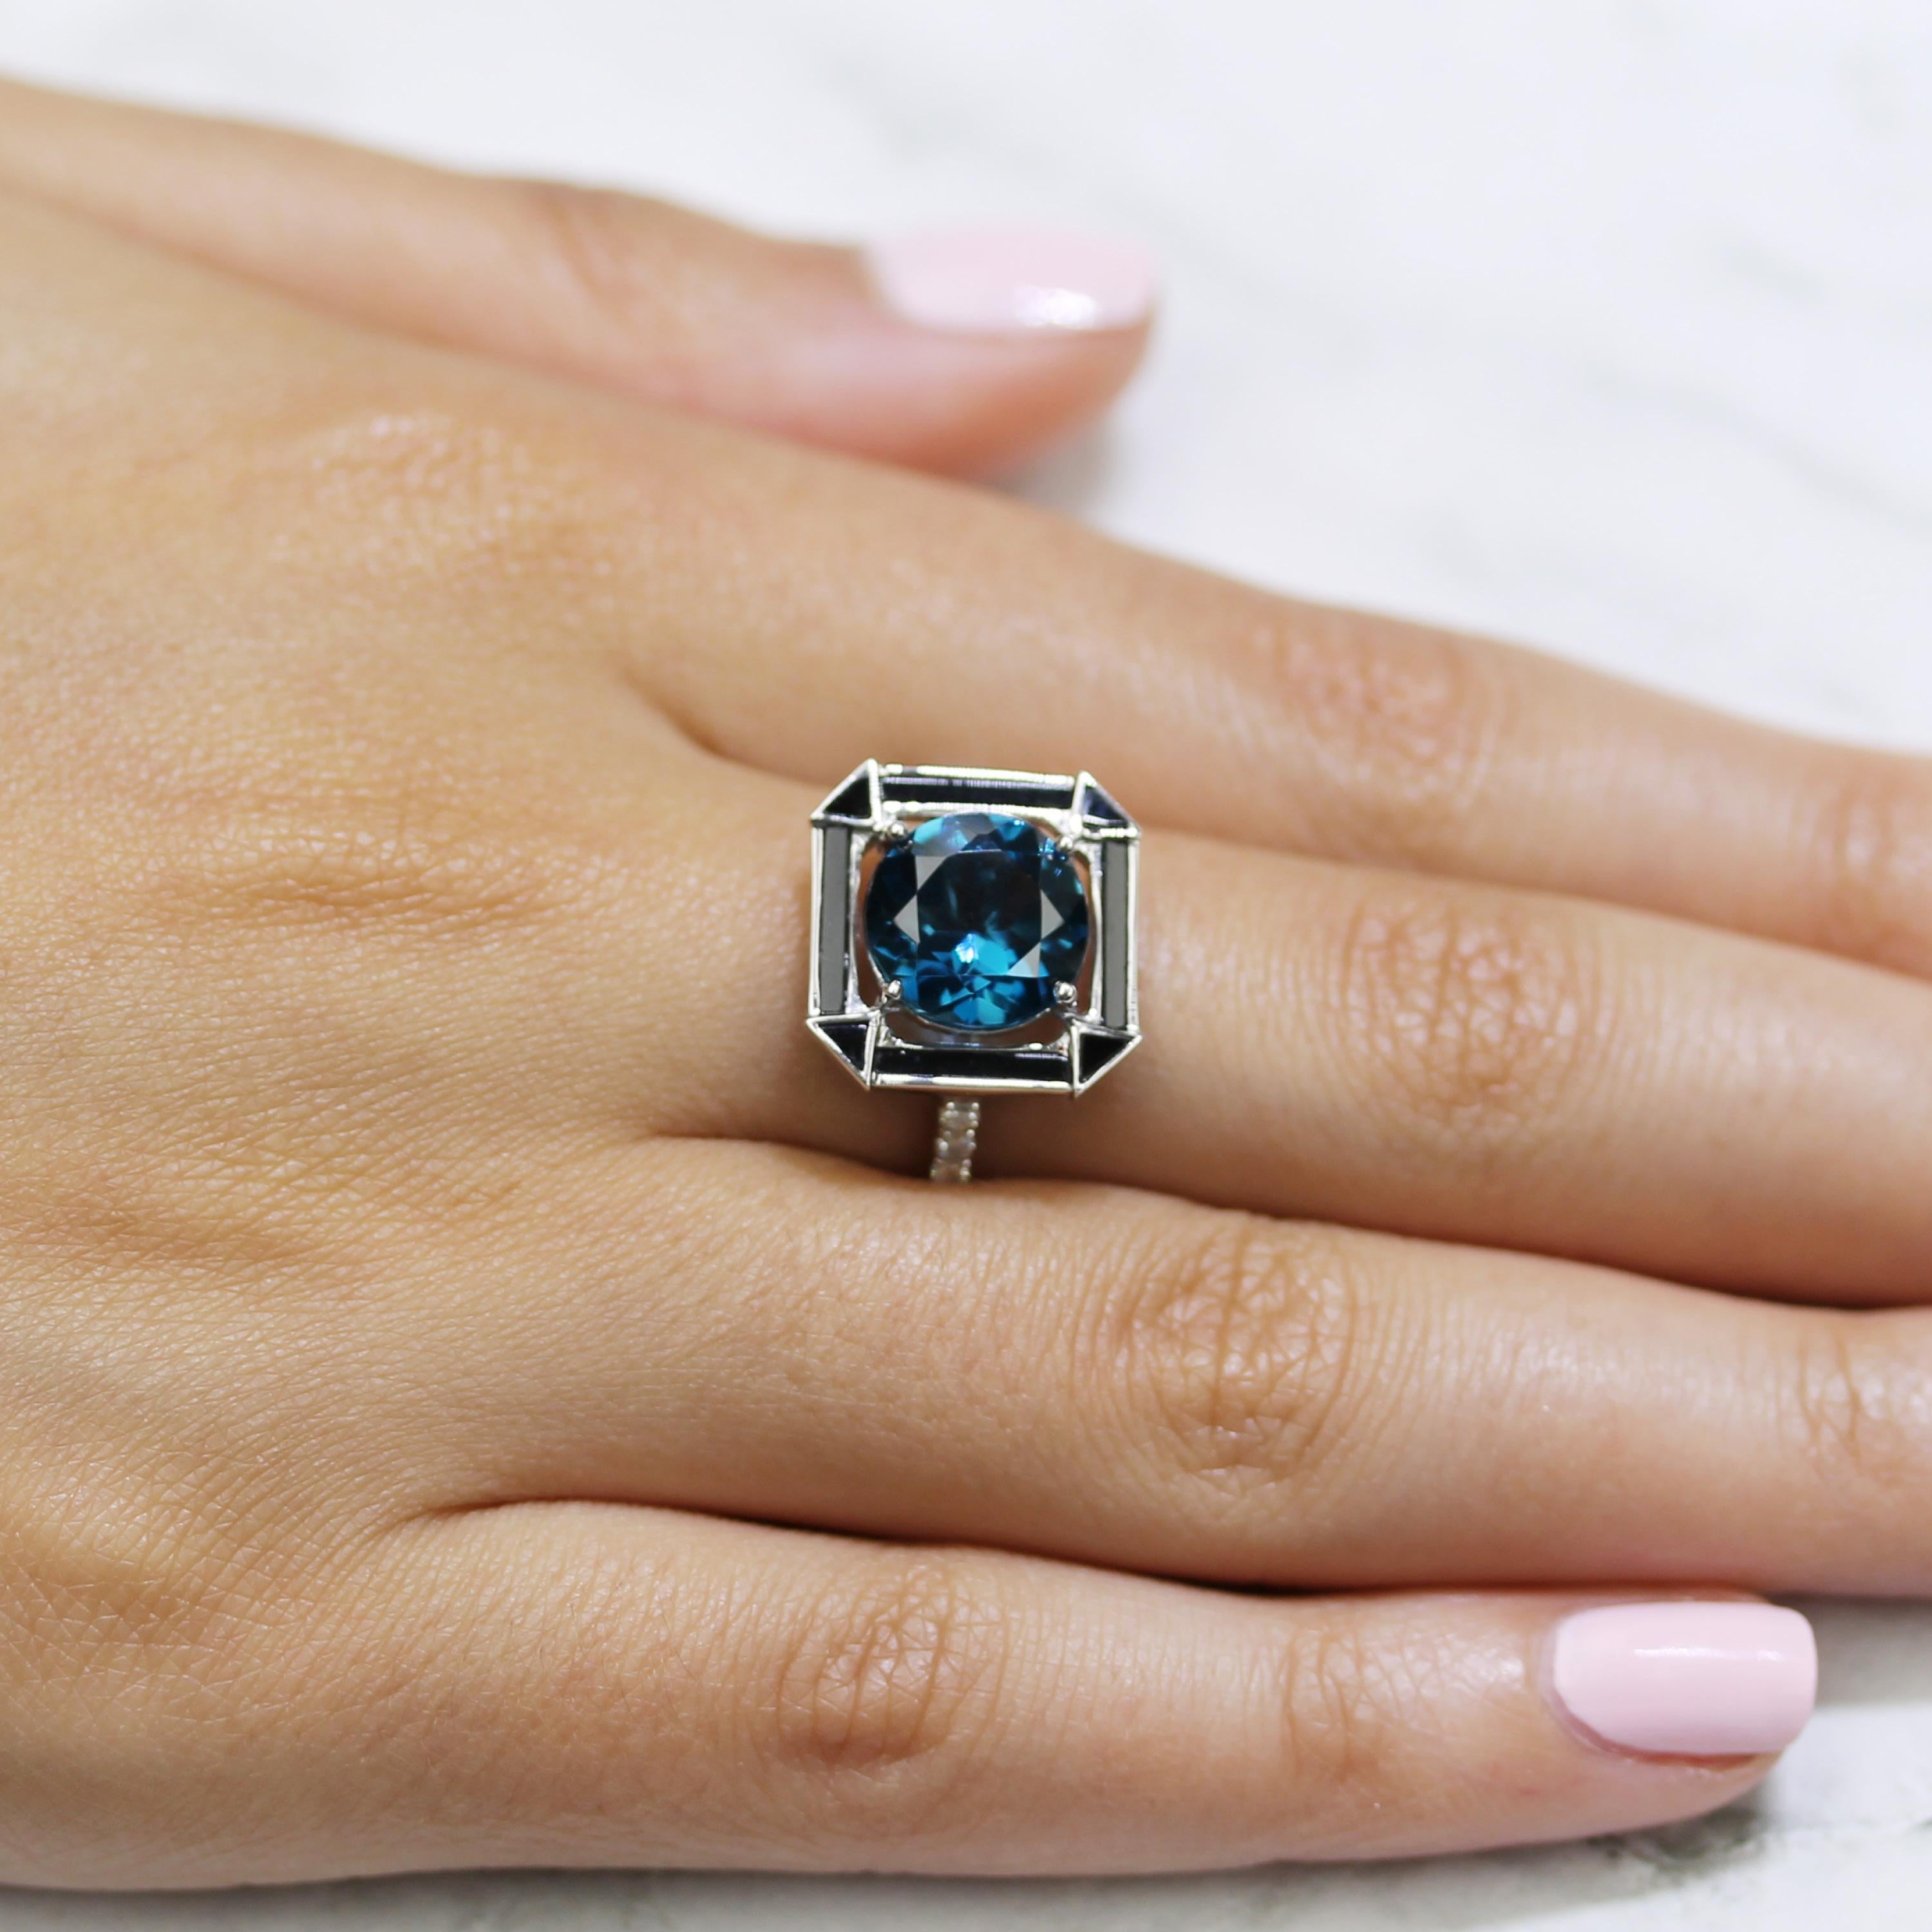 Art-Deco Style Cocktail Ring featuring Round London Blue Topaz, Black Onyx, and Diamonds, set in 18K white gold. Finger size 6.5, adjustable upon request/quote. London Blue Topaz stone used in this ring is natural, untreated, and a deep indigo blue.